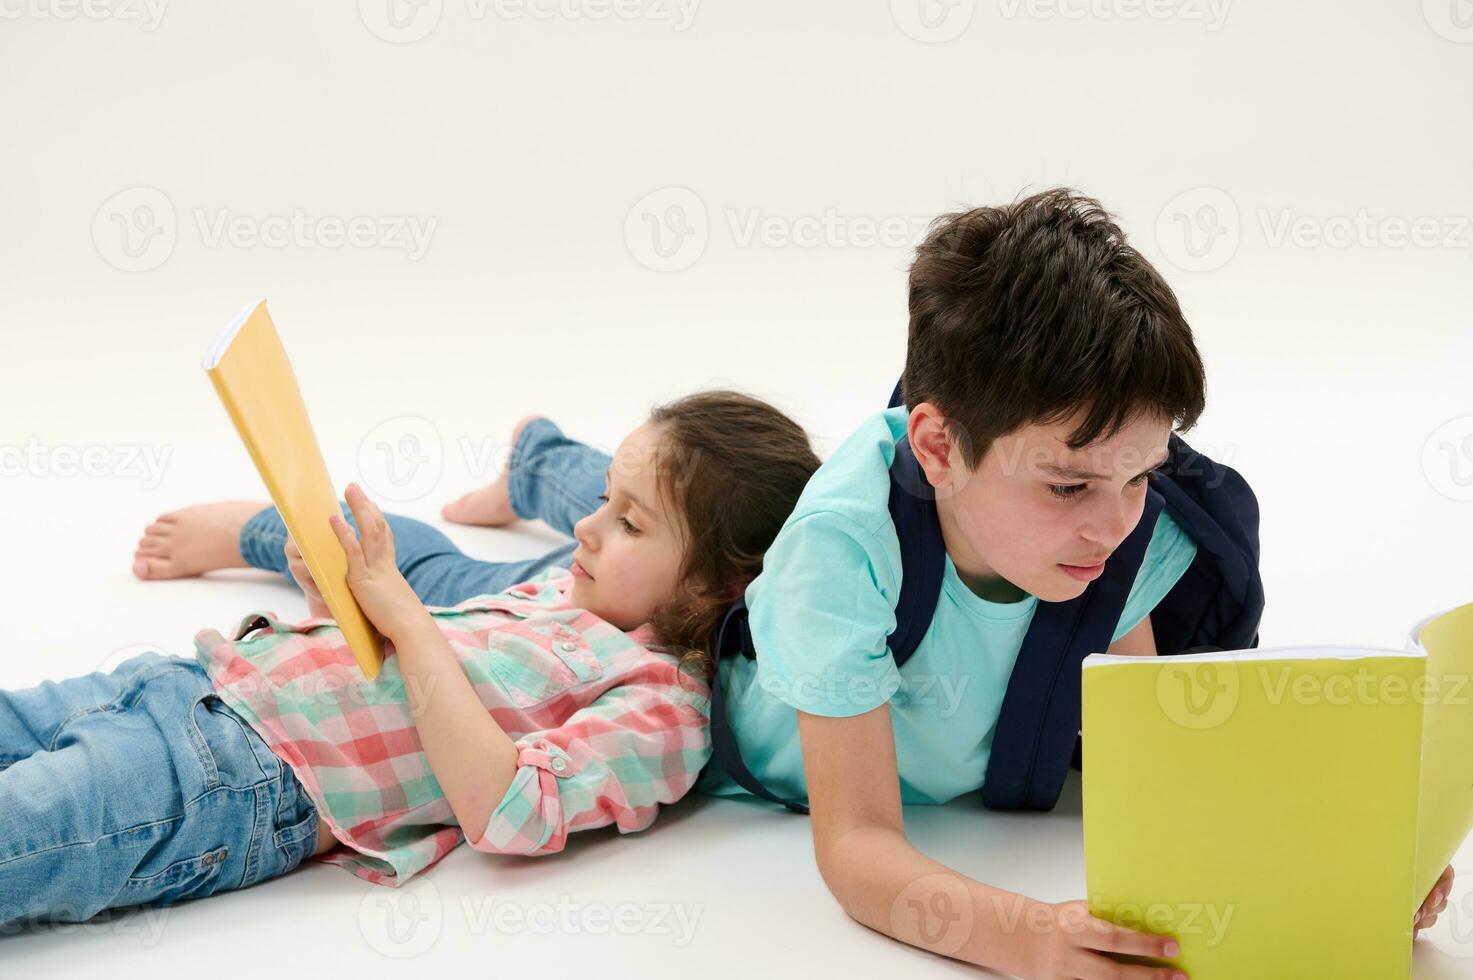 Preschooler girl and teenage boy holding workbooks, lying on a white background. Brother and sister doing homework photo